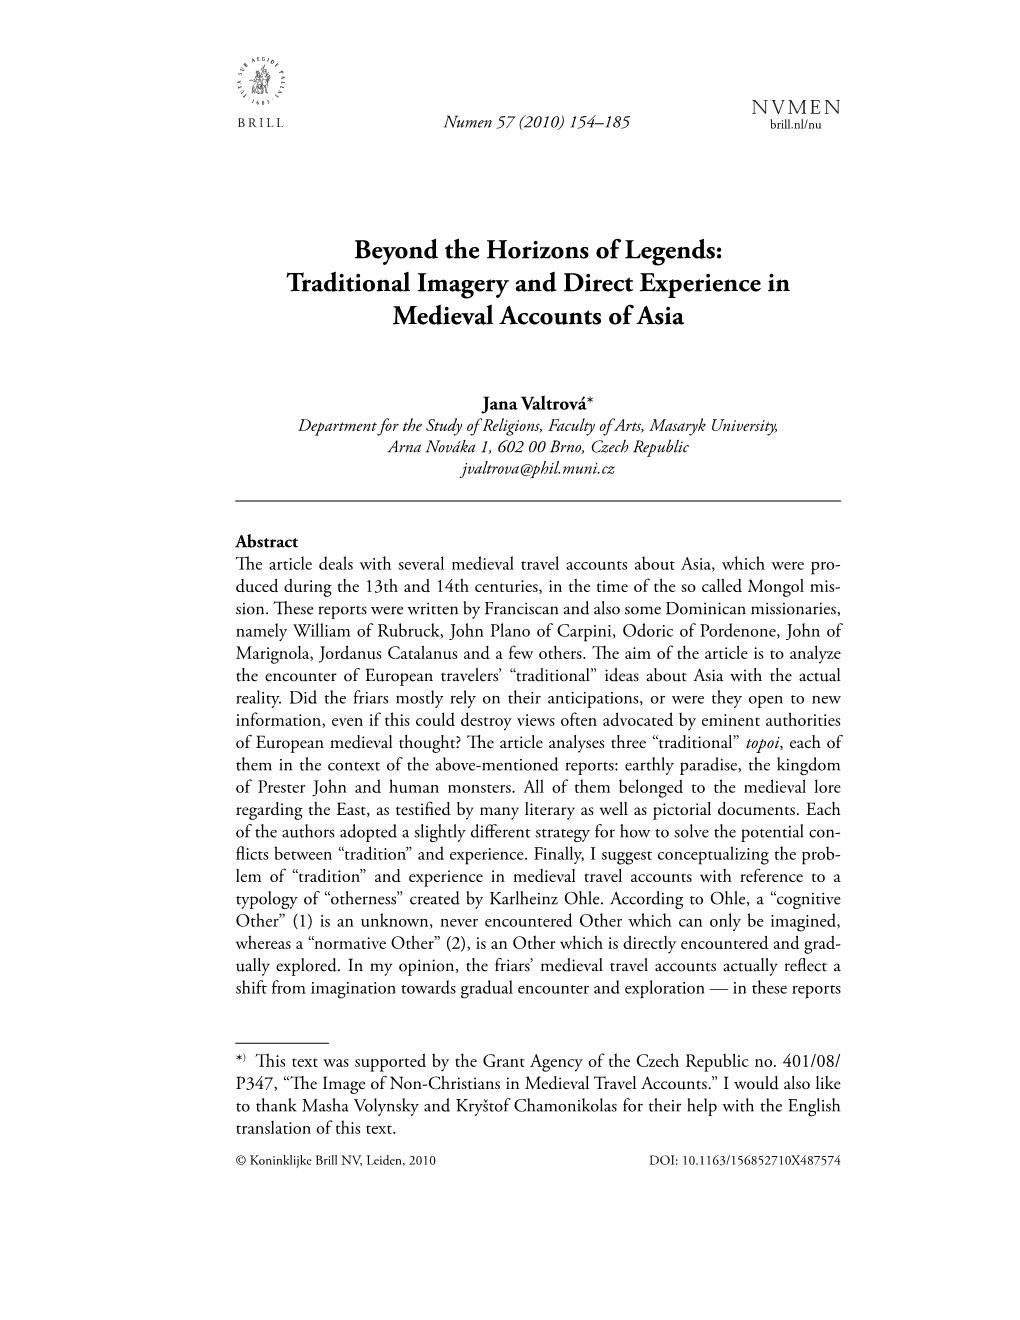 Beyond the Horizons of Legends: Traditional Imagery and Direct Experience in Medieval Accounts of Asia